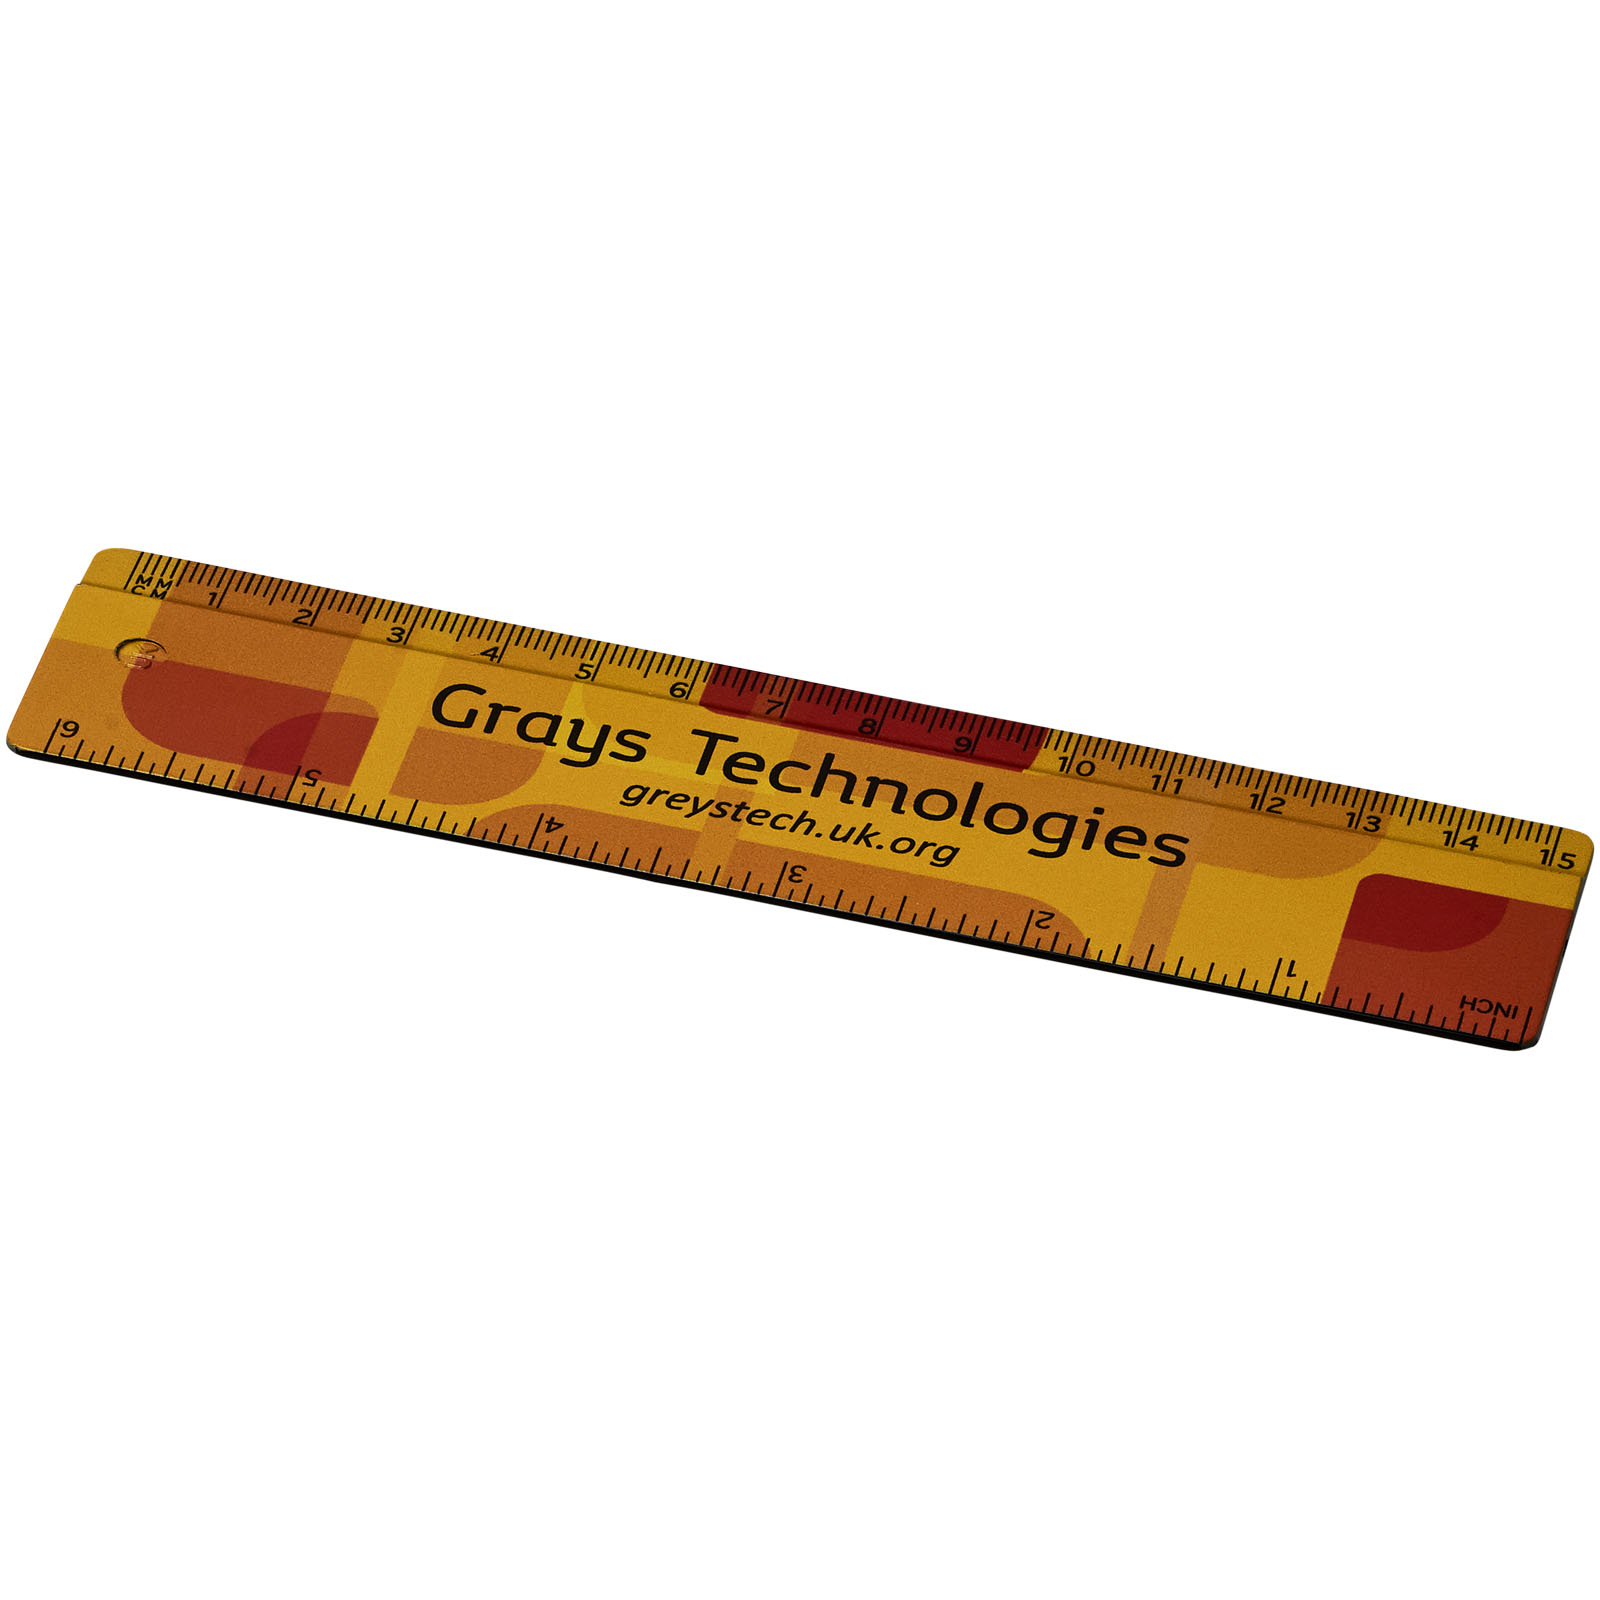 Advertising Desk Accessories - Terran 15 cm ruler from 100% recycled plastic - 0